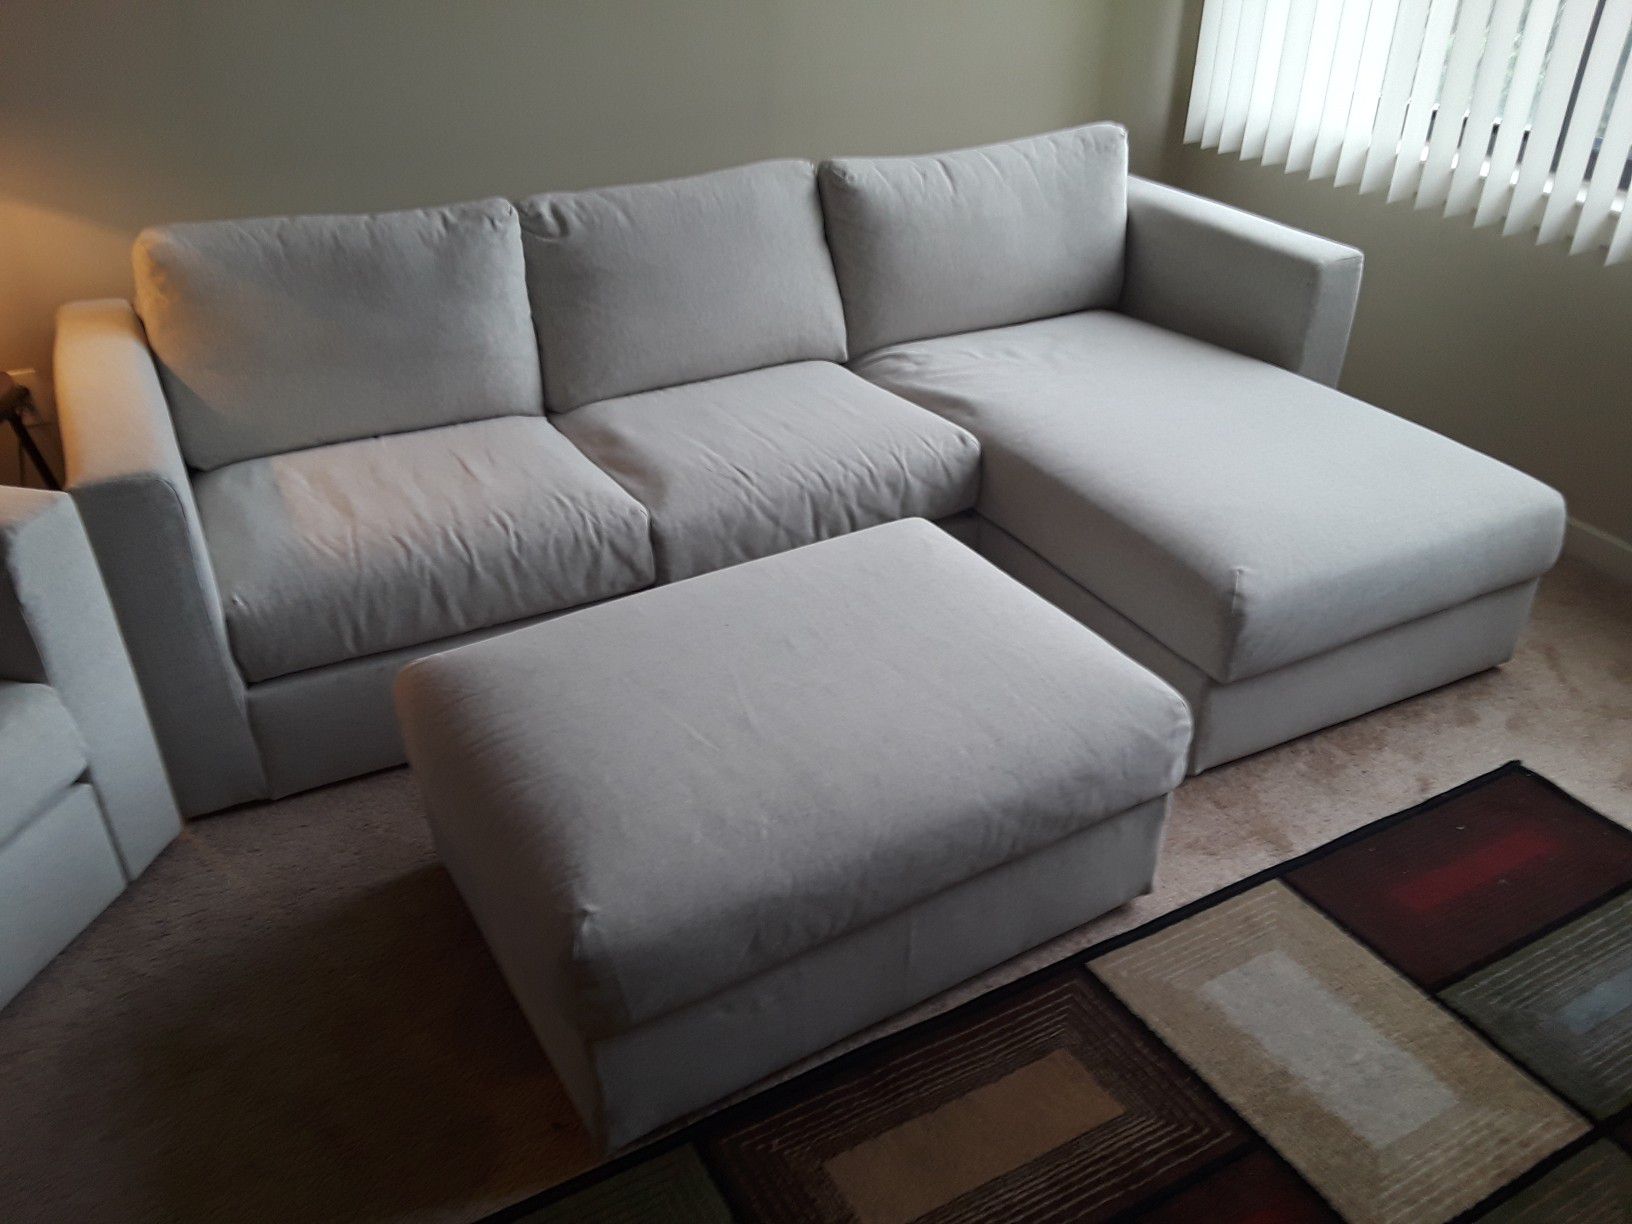 IKEA couch, chair & ottoman